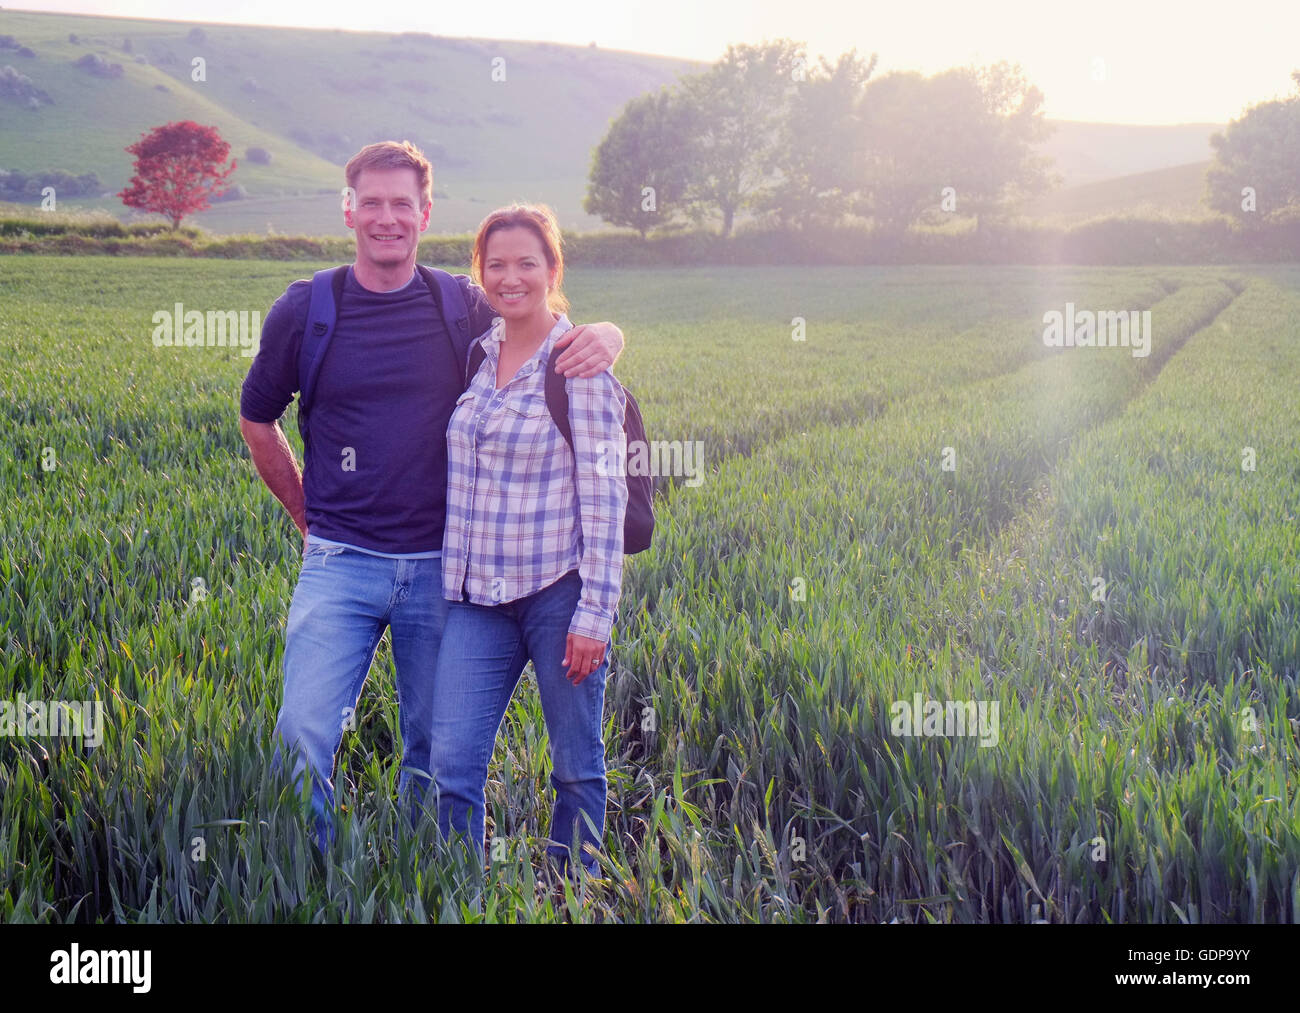 Couple in field looking at camera smiling Stock Photo